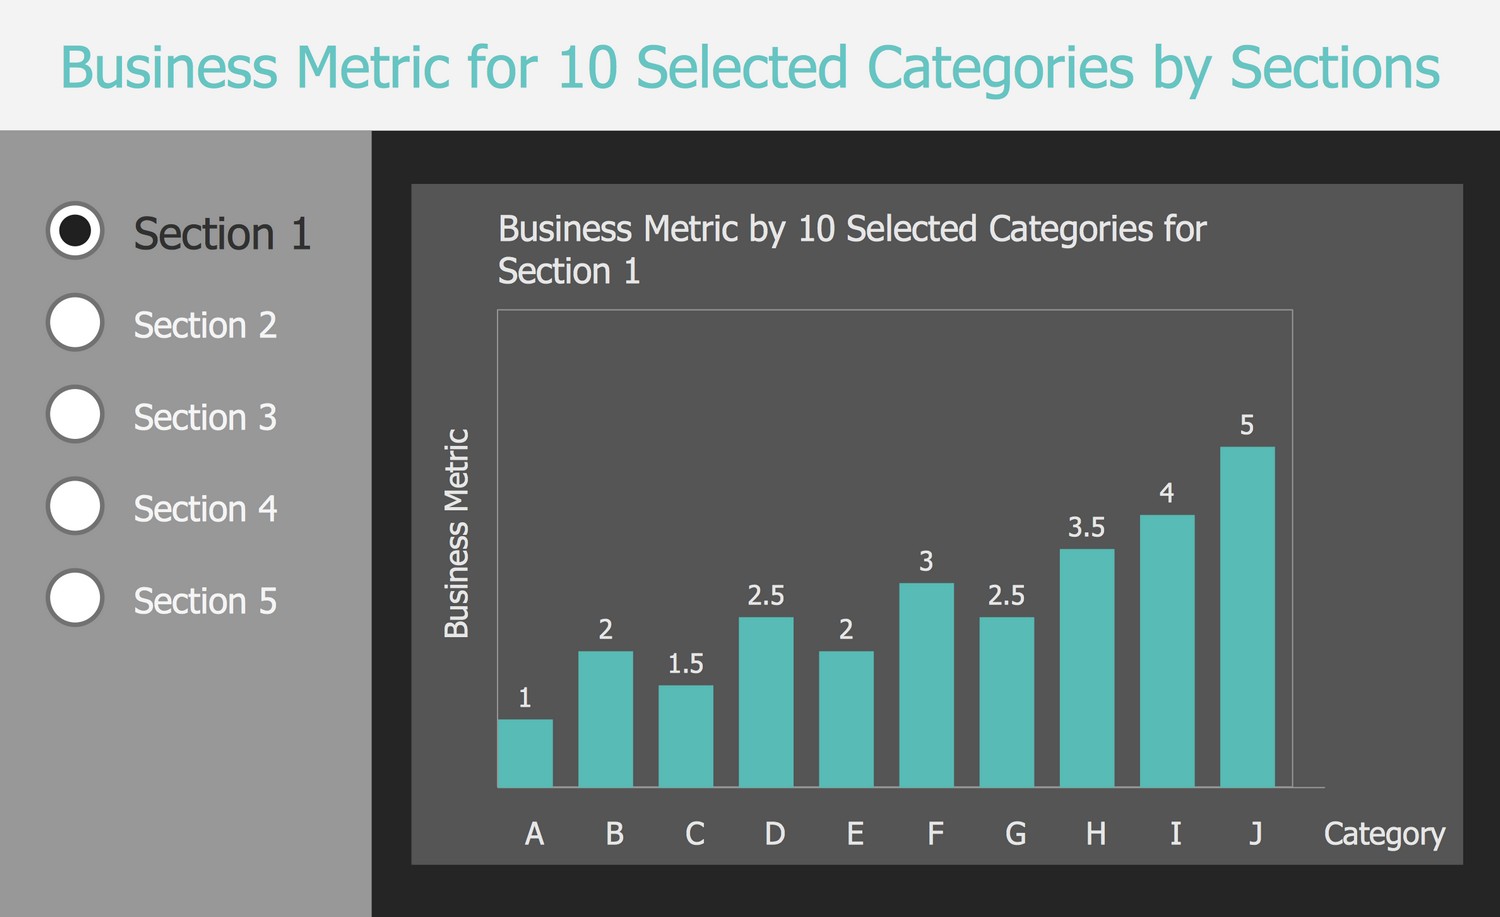 Business Intelligence Dashboard Template - Business Metric for 10 Selected Categories by Sections